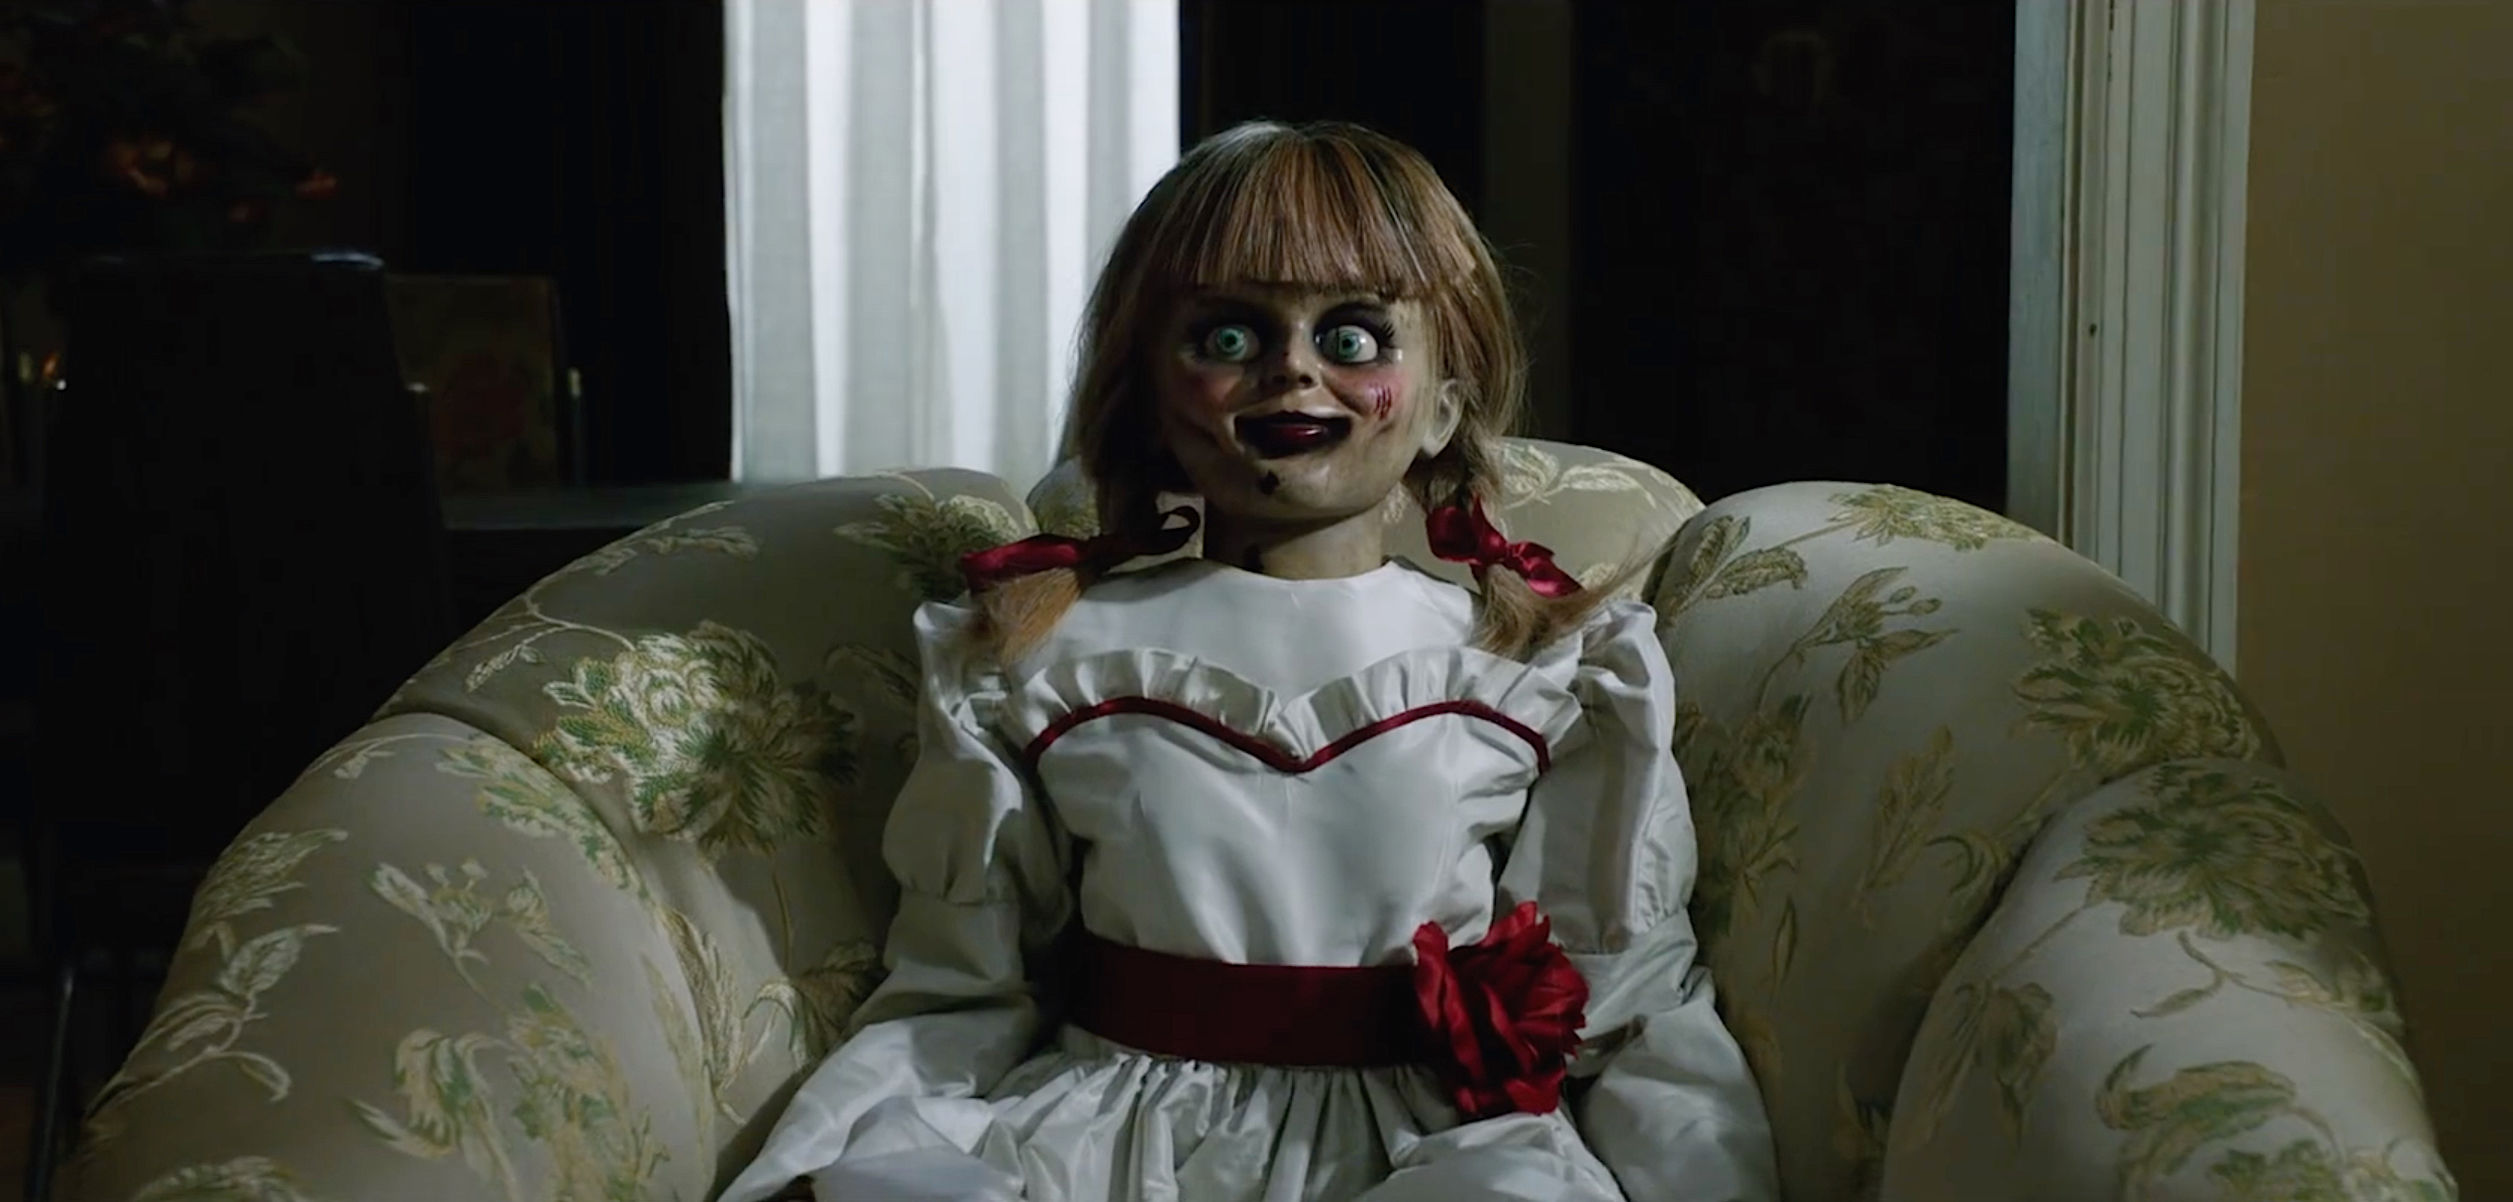 The Annabelle doll in Annabelle Comes Home